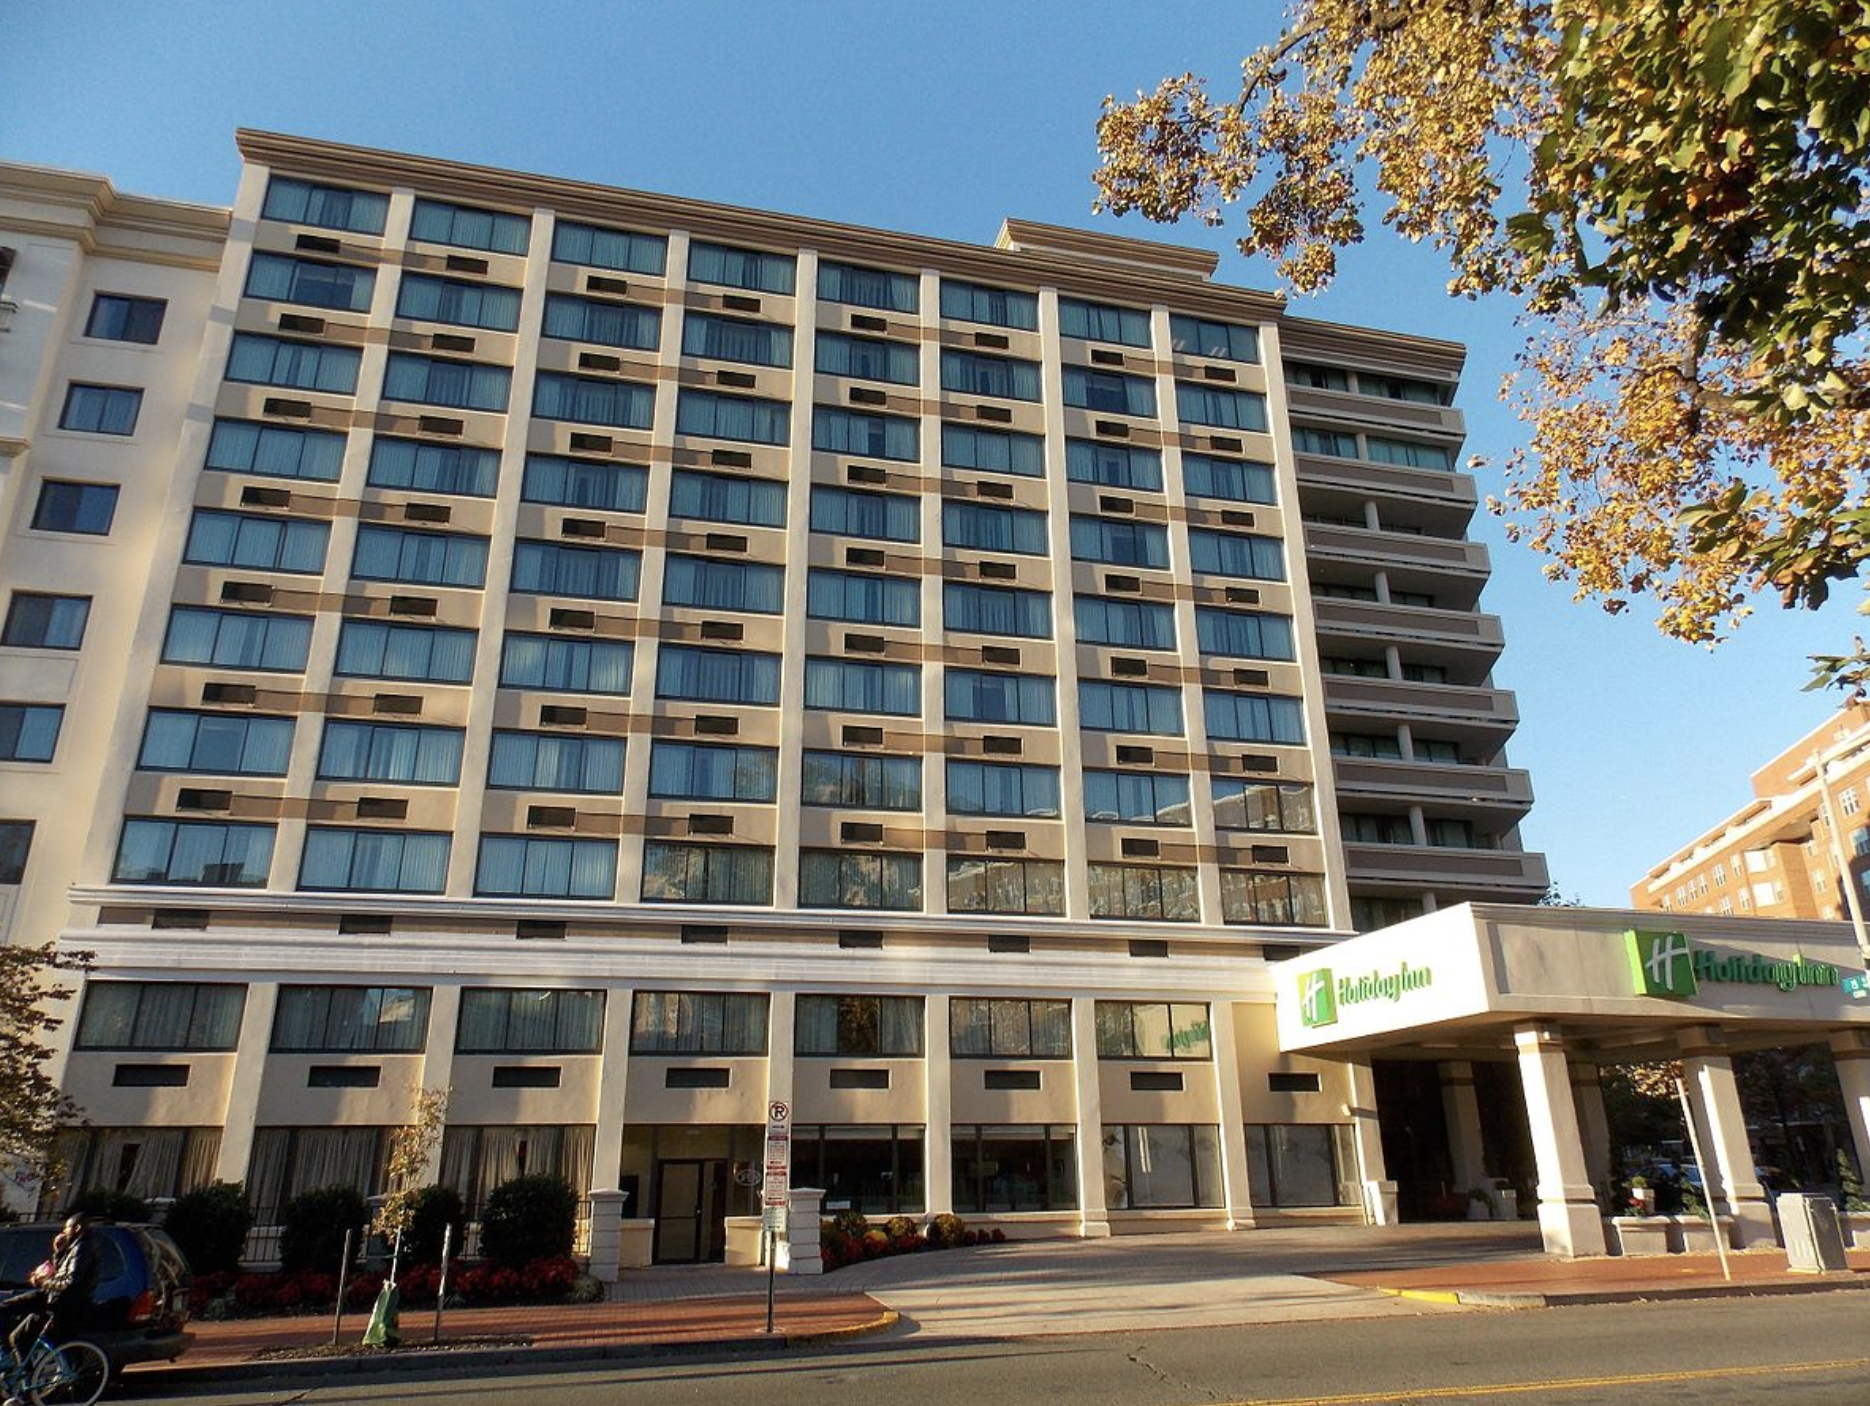 Picture shows the exterior of the Holiday Inn on Rhode Island Ave. NW